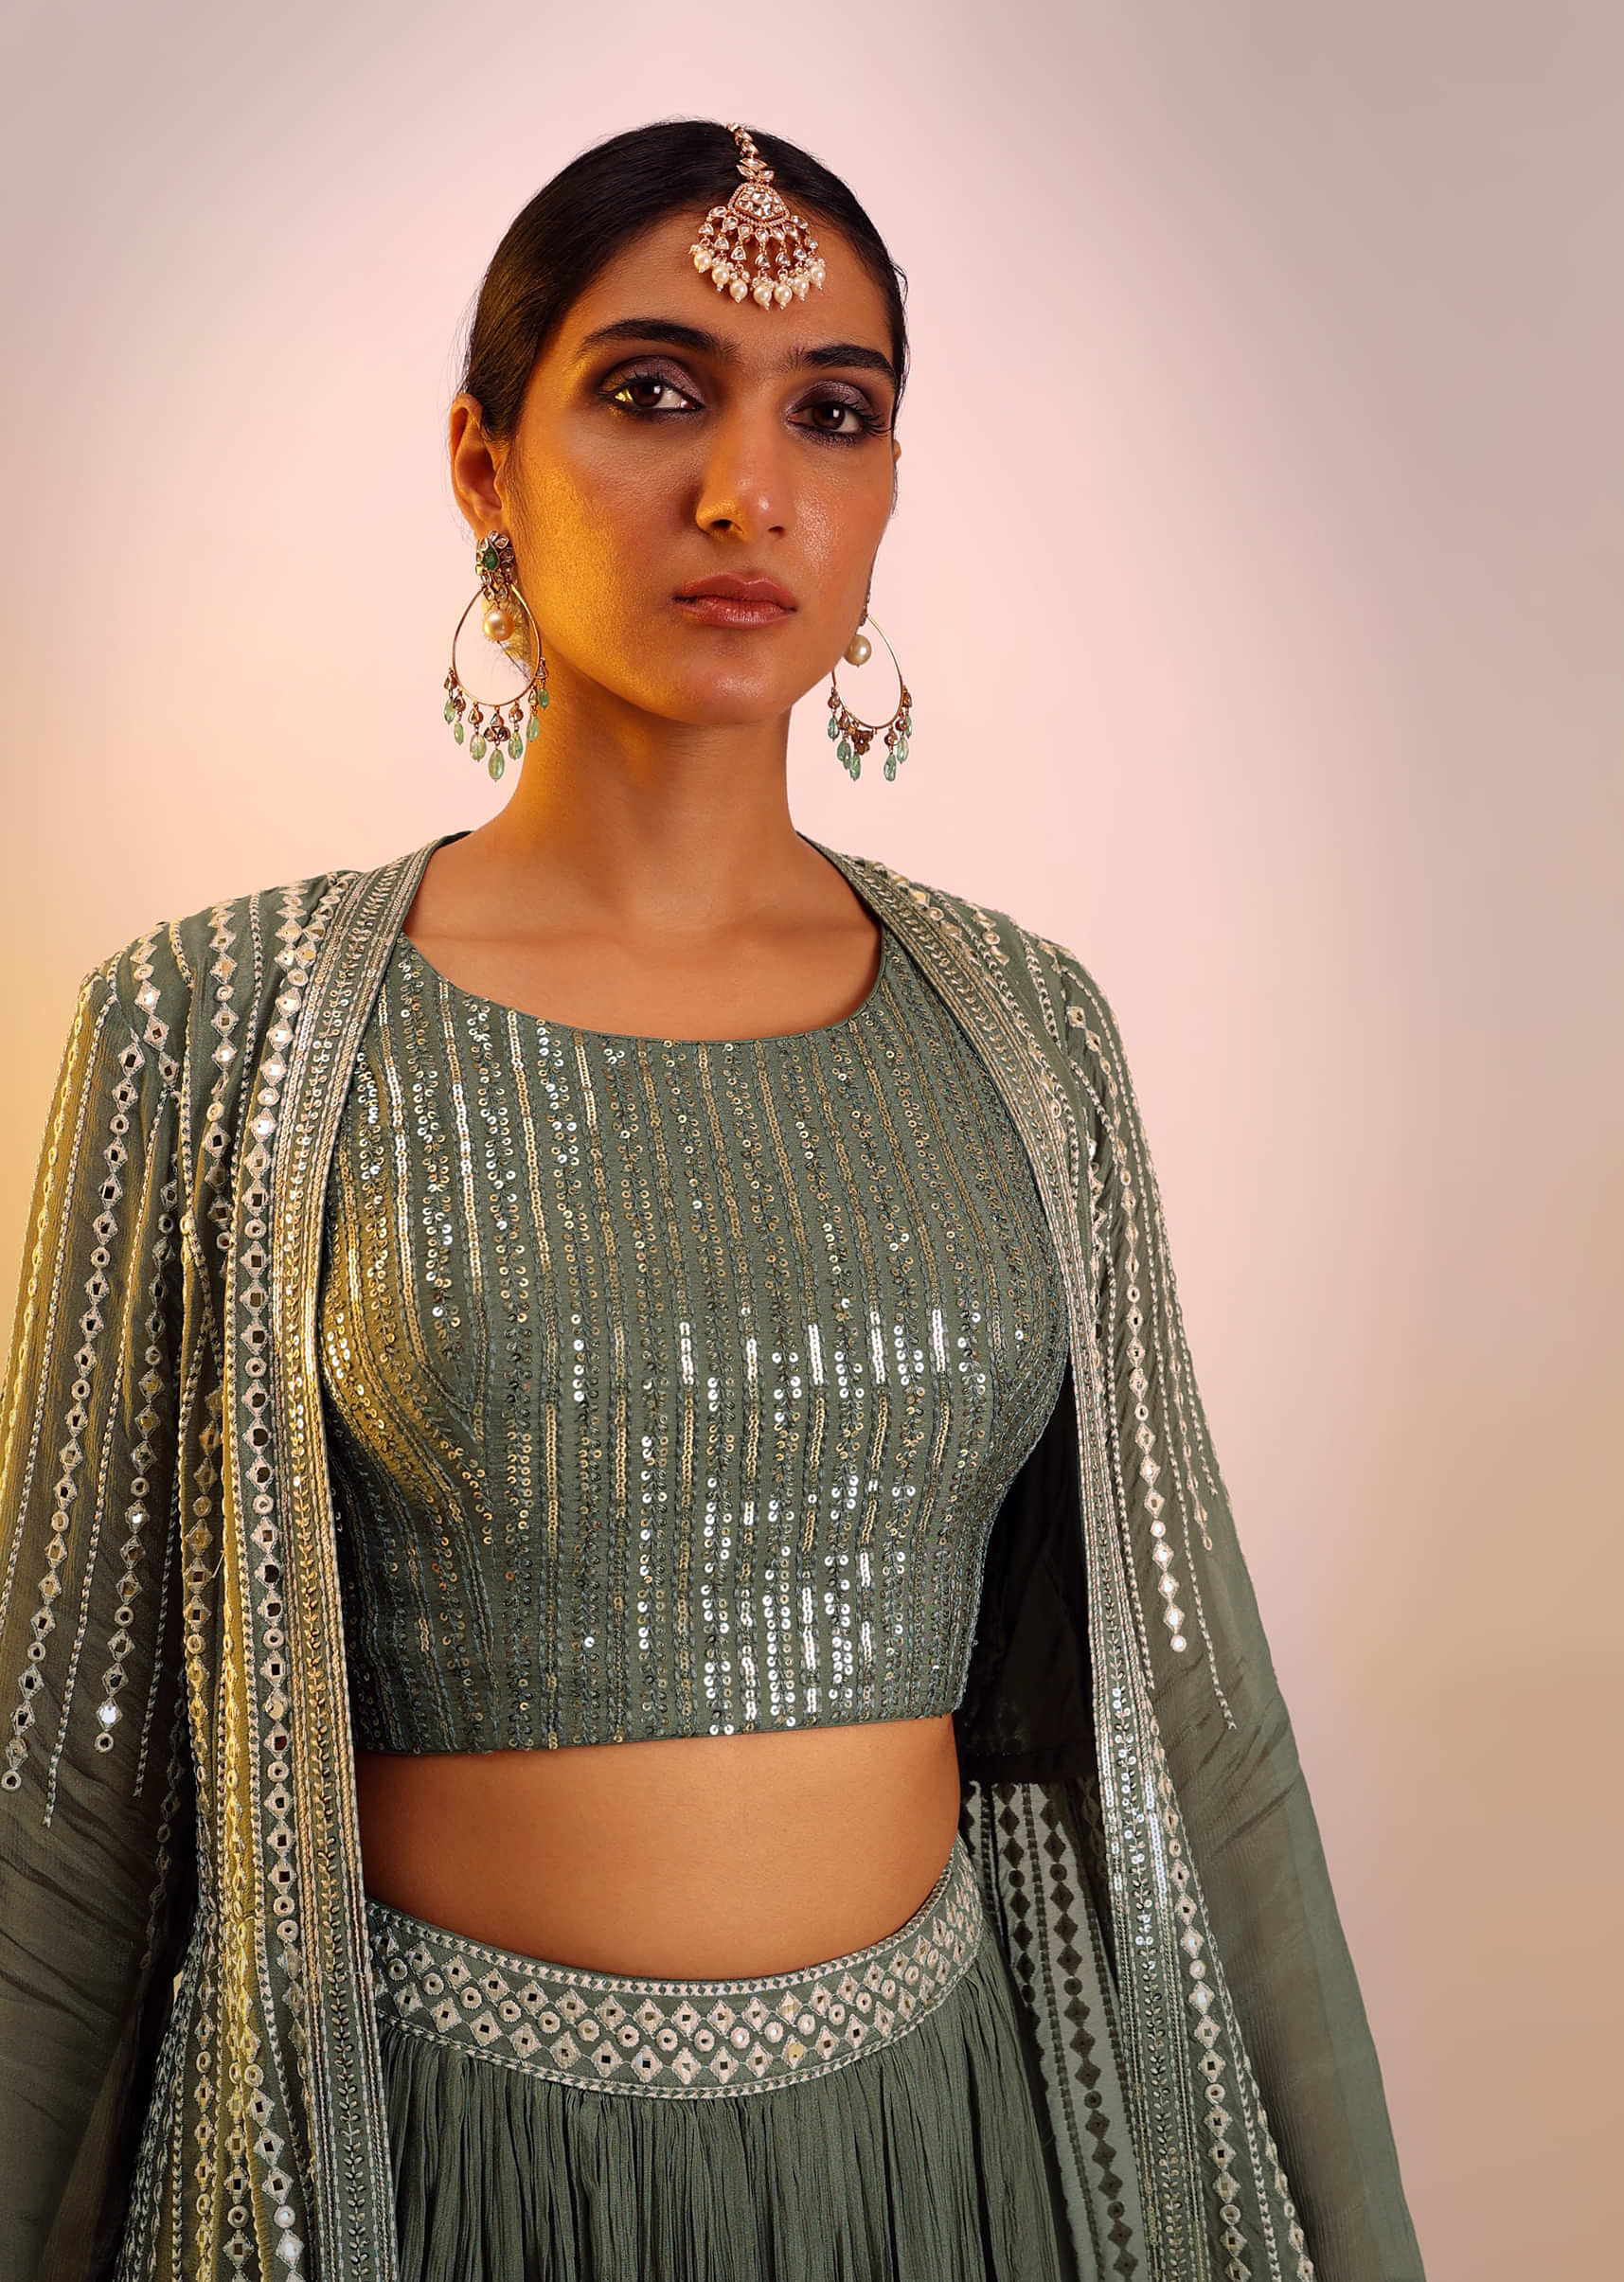 Olive Green Lehenga, Crop Top And Jacket Set With Mirror Abla Embroidery Detailing